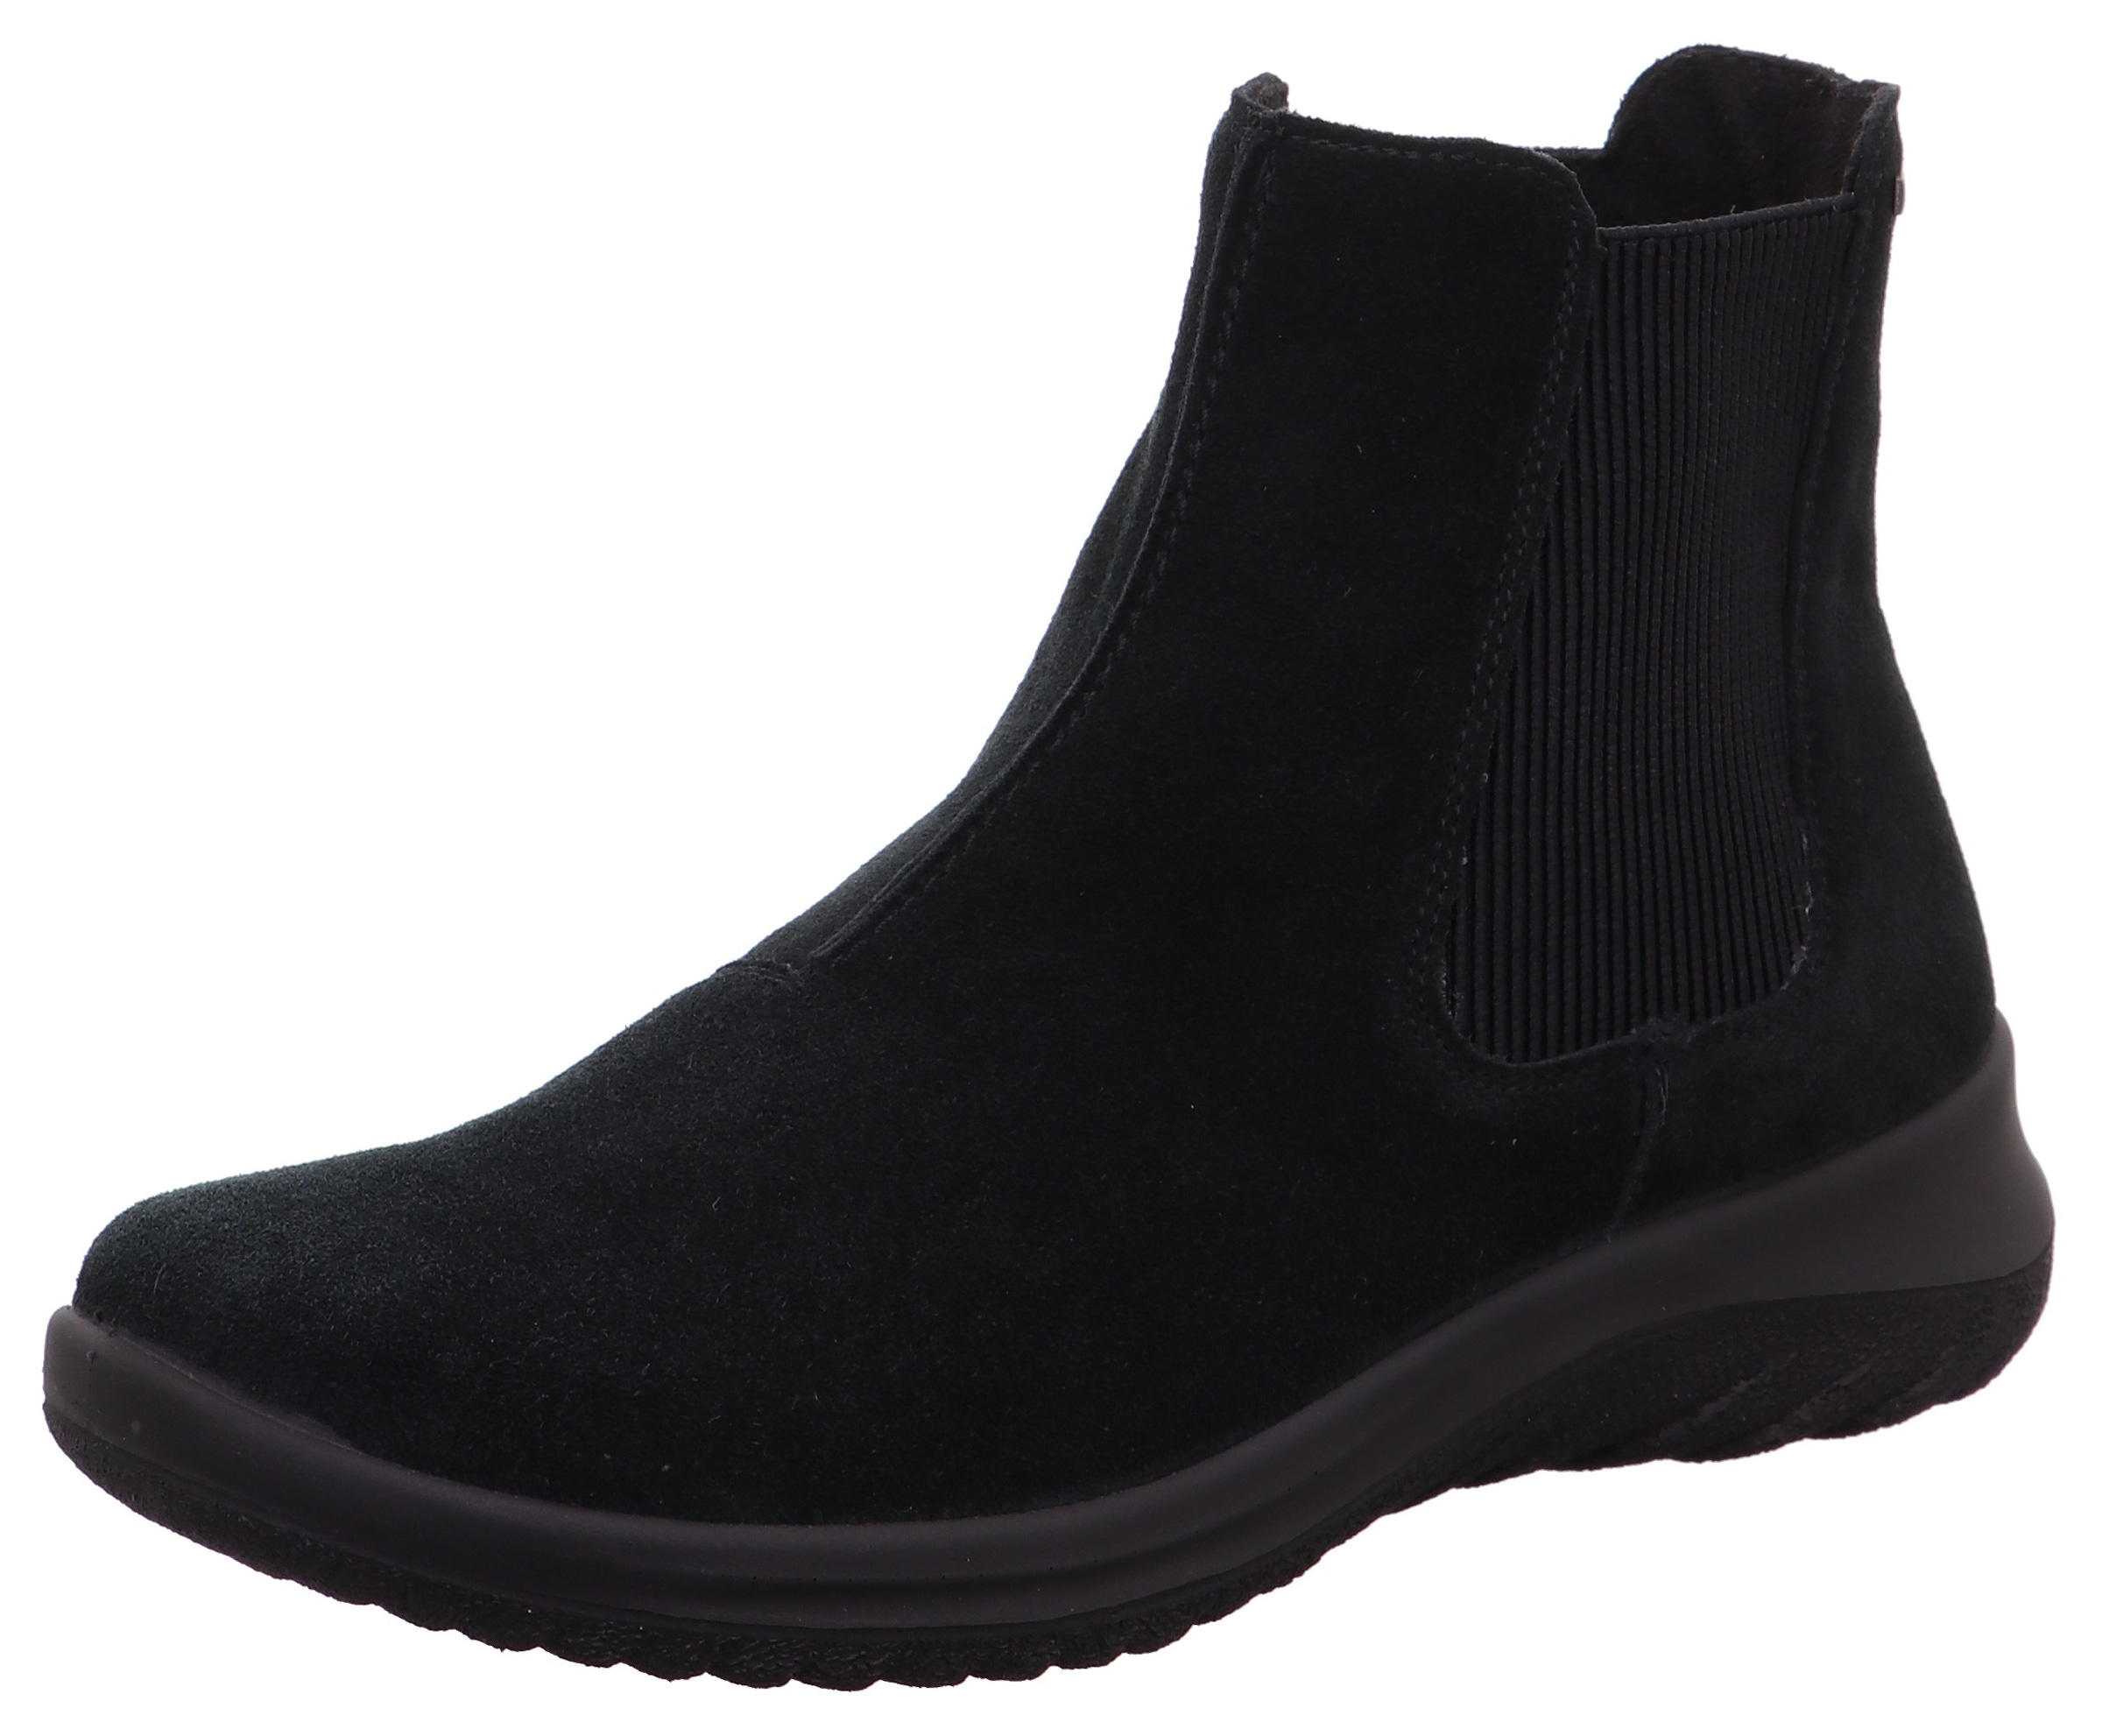 Chelseaboots »SOFTBOOT 4.0«, mit GORE-TEX